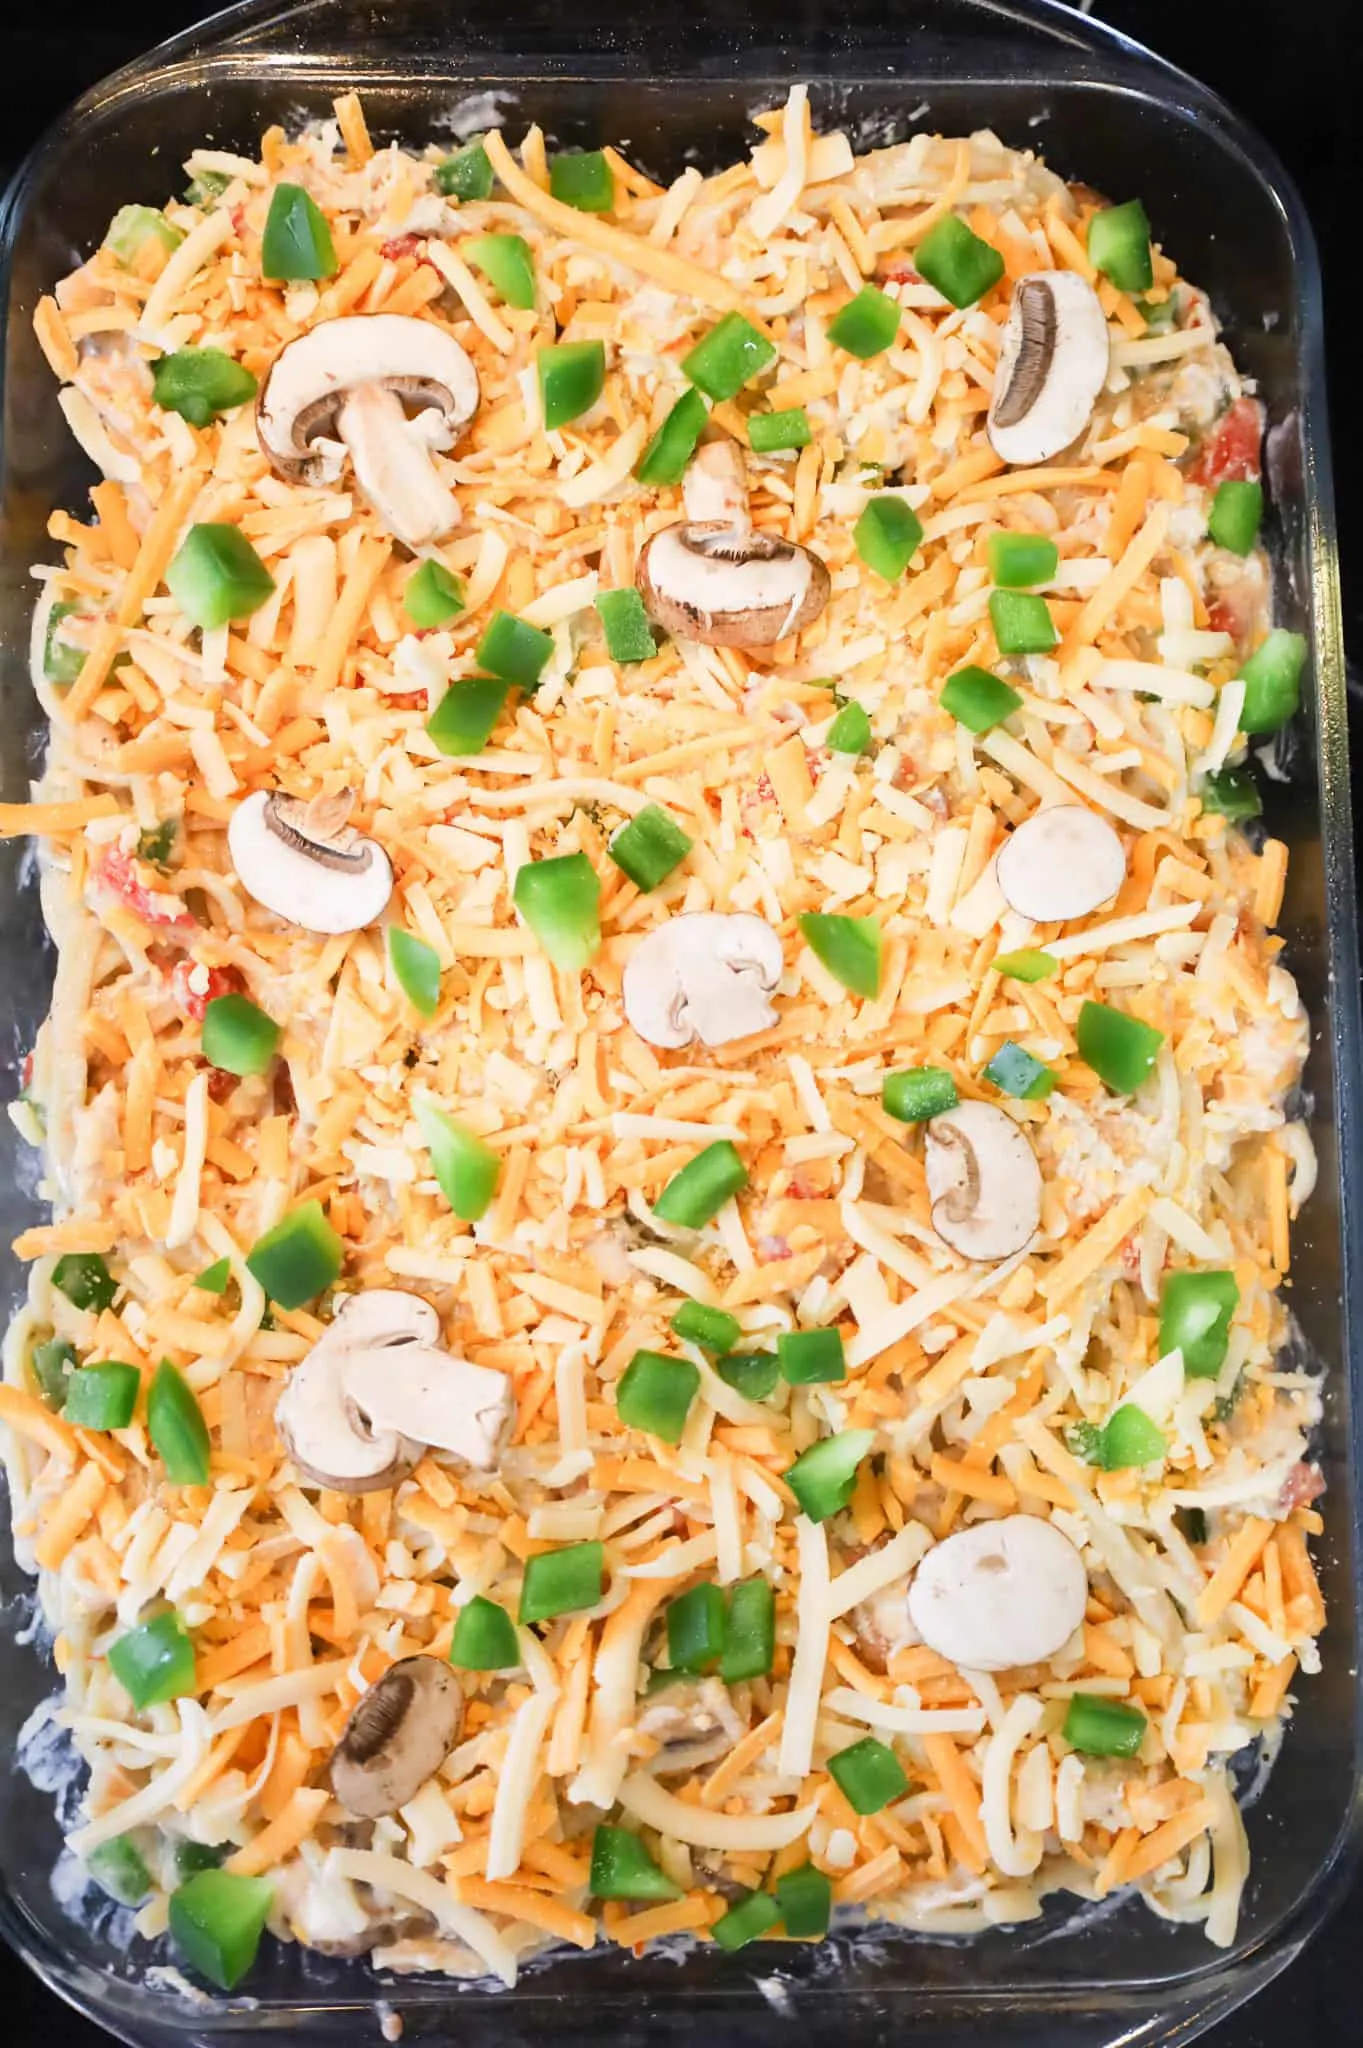 diced green peppers and sliced mushrooms on top of cheesy chicken spaghetti in a baking dish